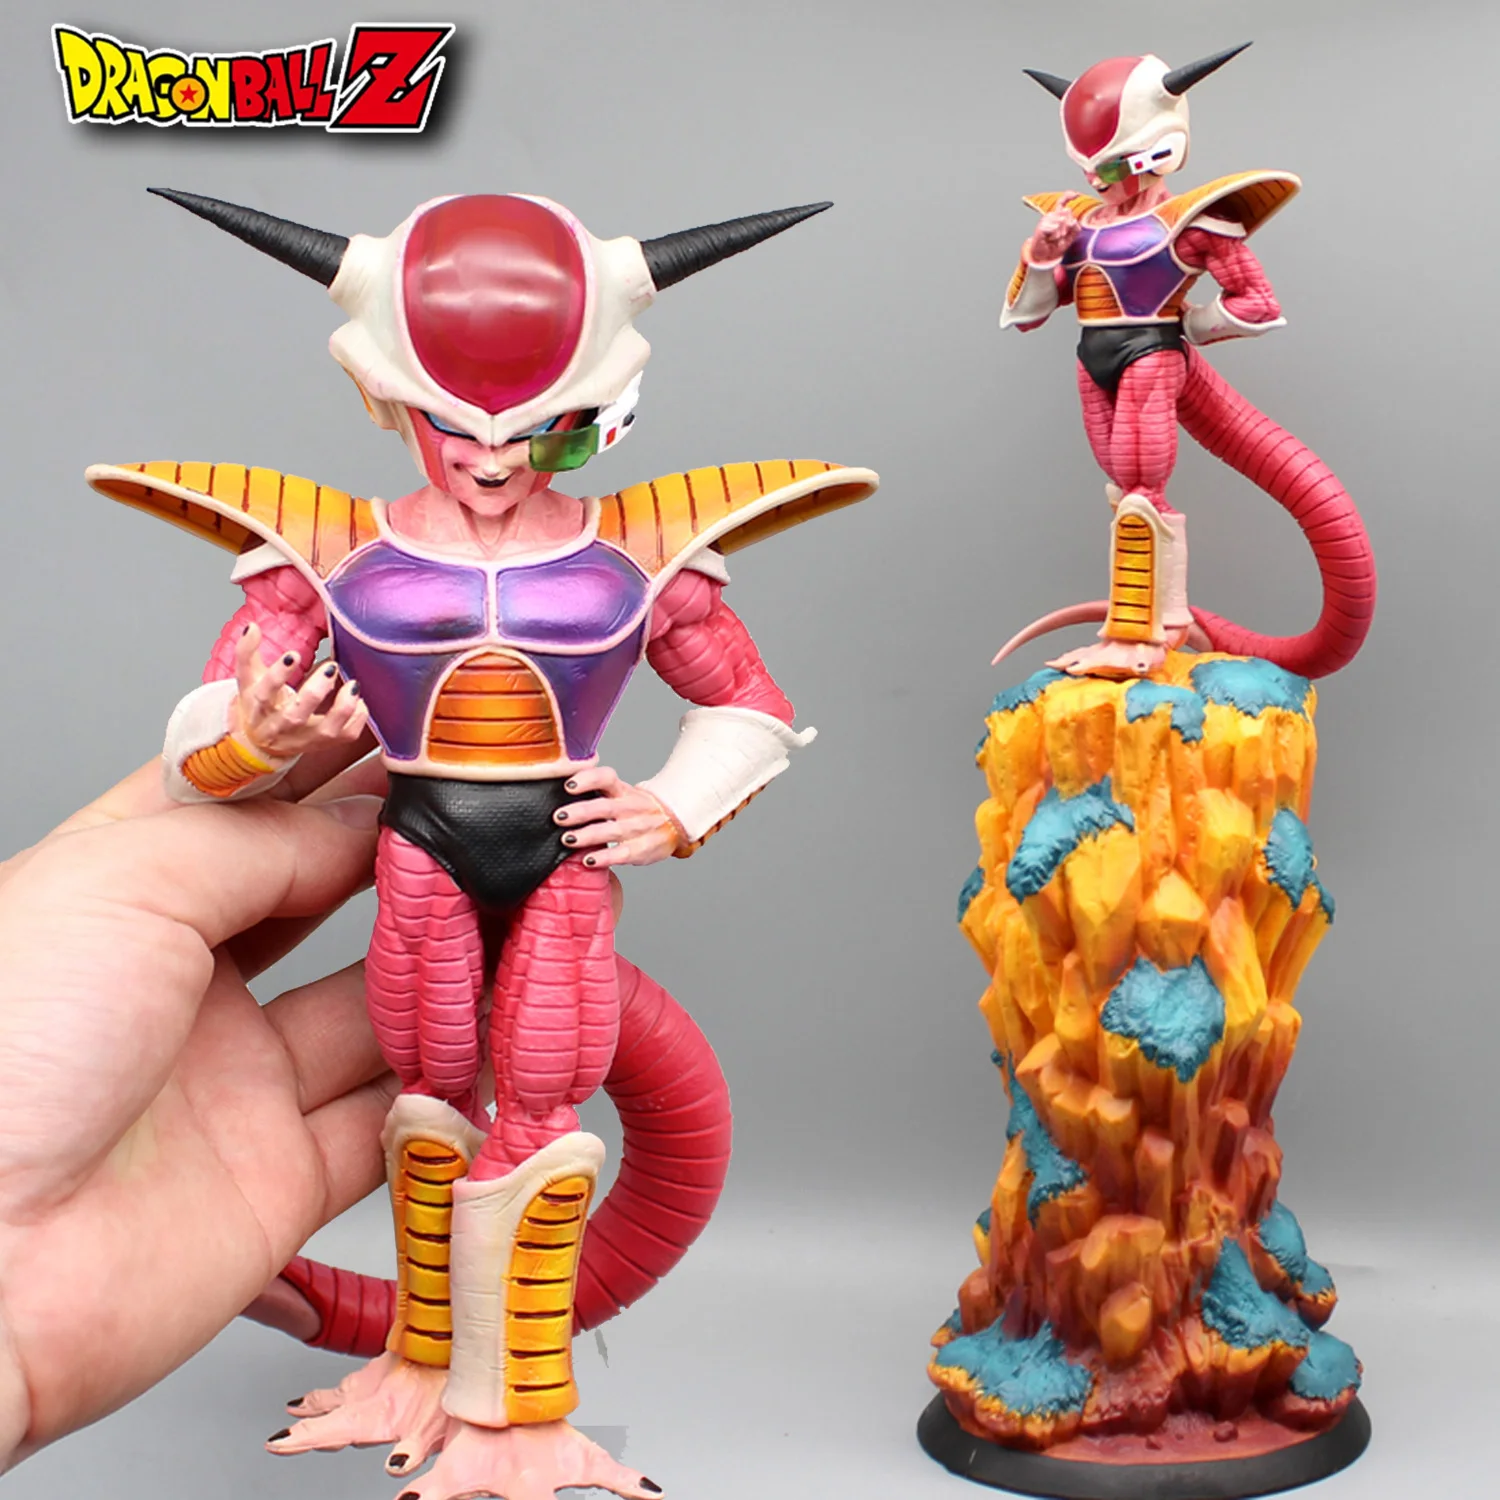 

46cm Dragon Ball Z Figure Frieza Anime Figure Extra Large PVC Statue Model Doll Collectible Room Decoration Ornaments Toys Gifts